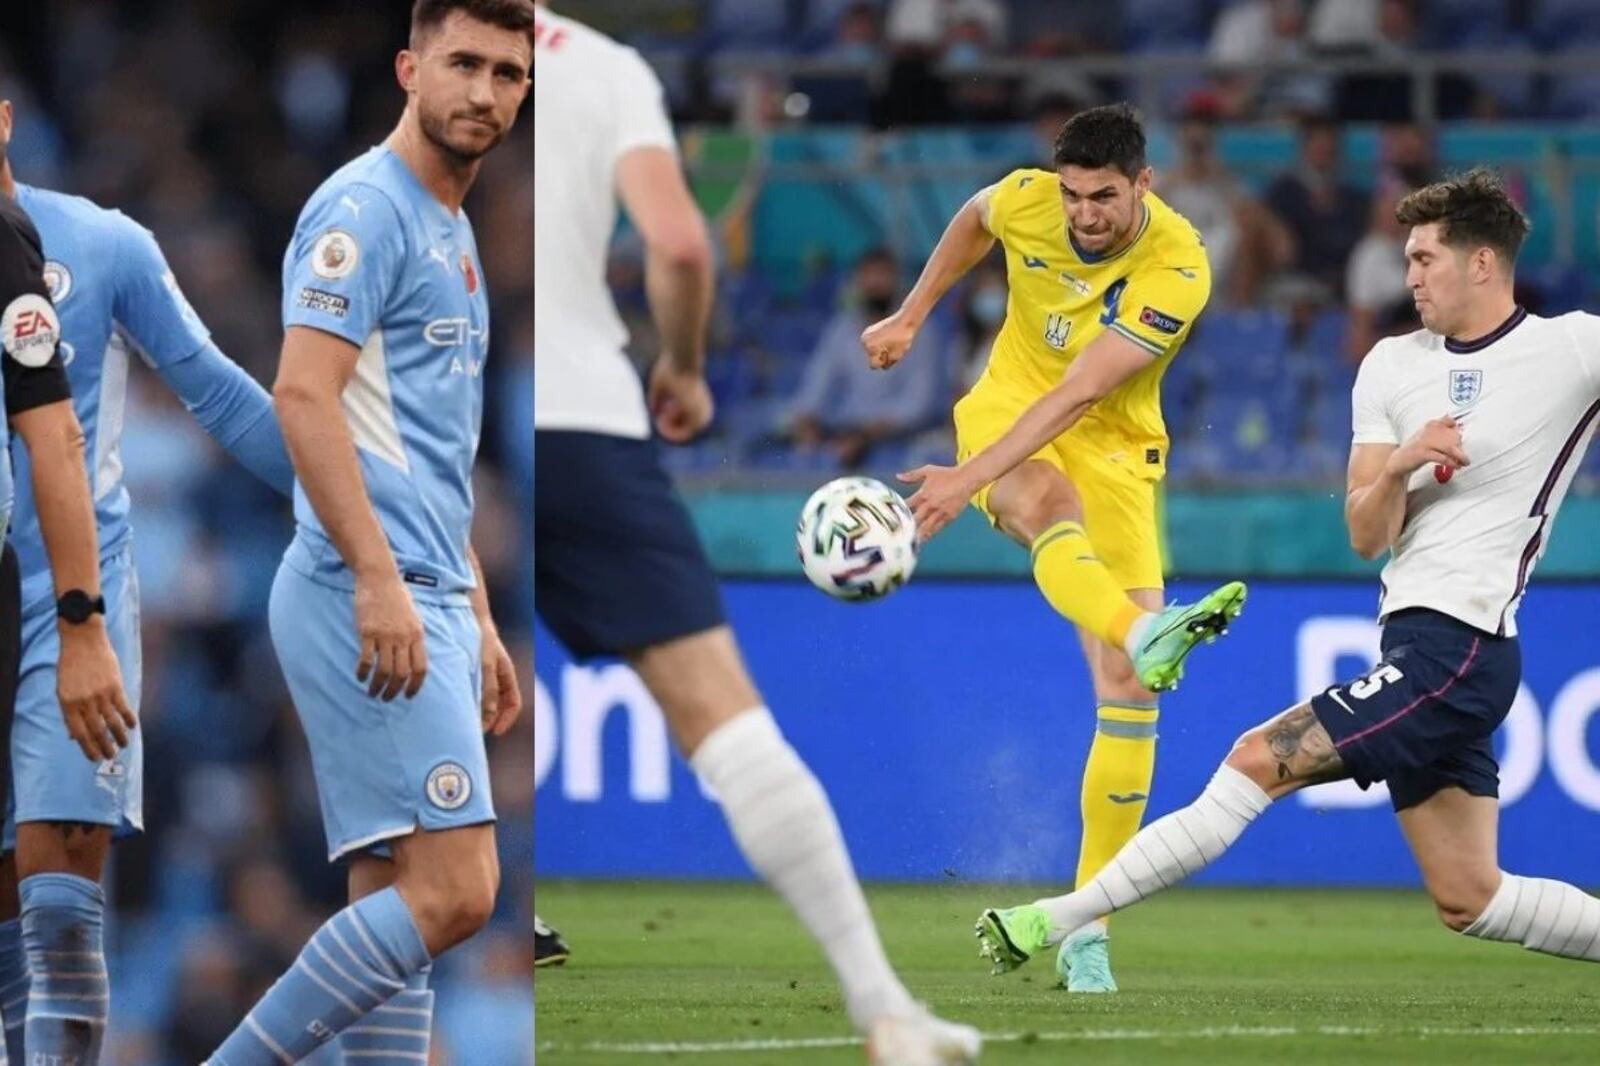 The worst news Manchester City received in England's game against Ukraine